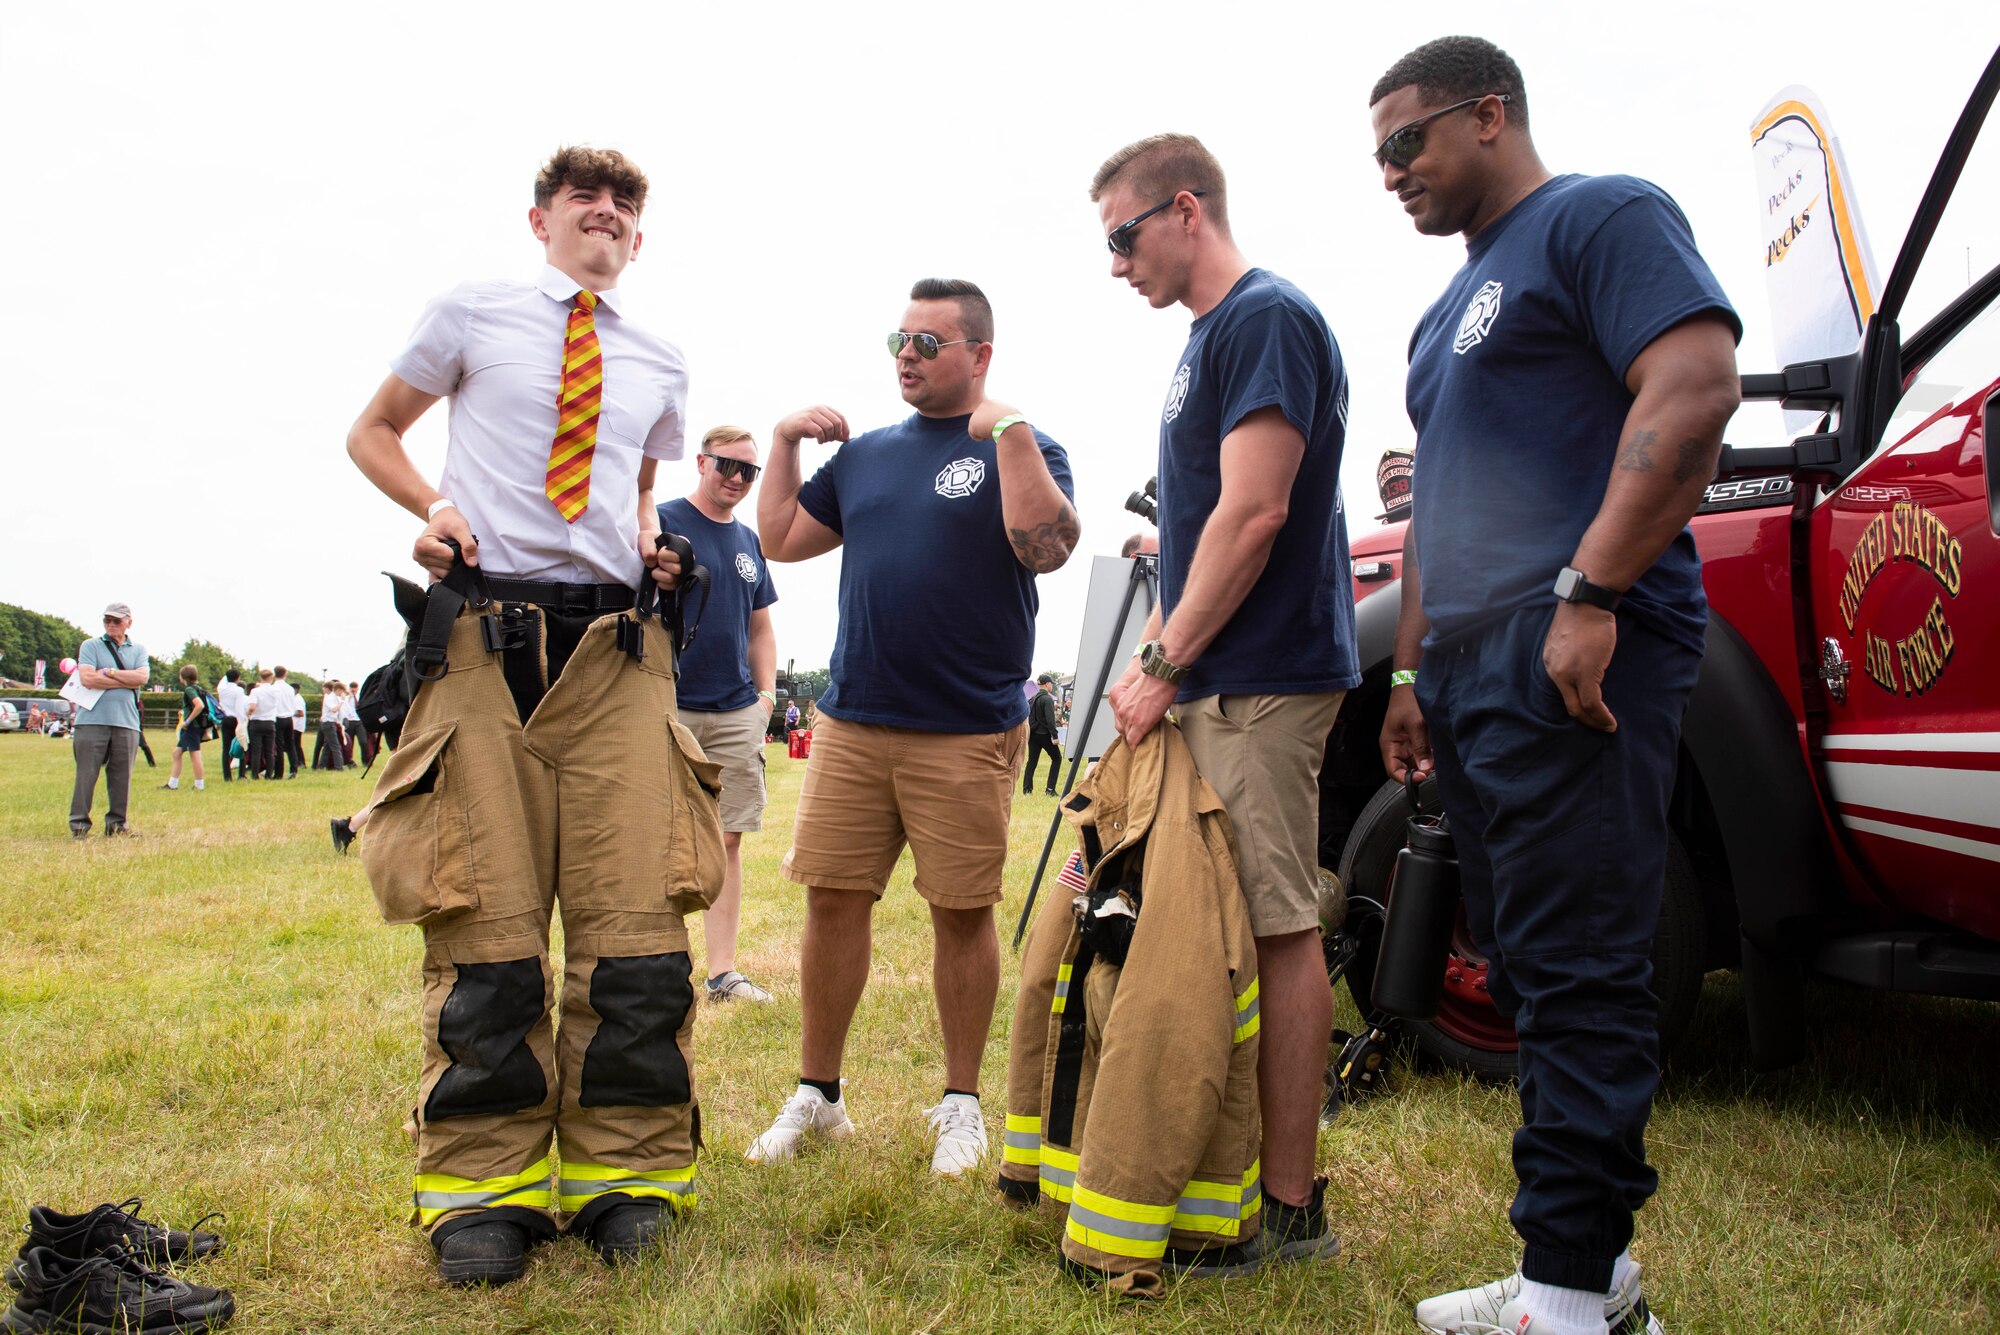 U.S. Air Force 100th Civil Engineer Squadron firefighters from RAF Mildenhall, engage with attendees during the Cambridgeshire County Day at the Newmarket July Course, England, June 23, 2022. The County Day was an opportunity to celebrate Cambridgeshire and Her Majesty The Queen’s Platinum Jubilee. (U.S. Air Force photo by Senior Airman Jennifer Zima)